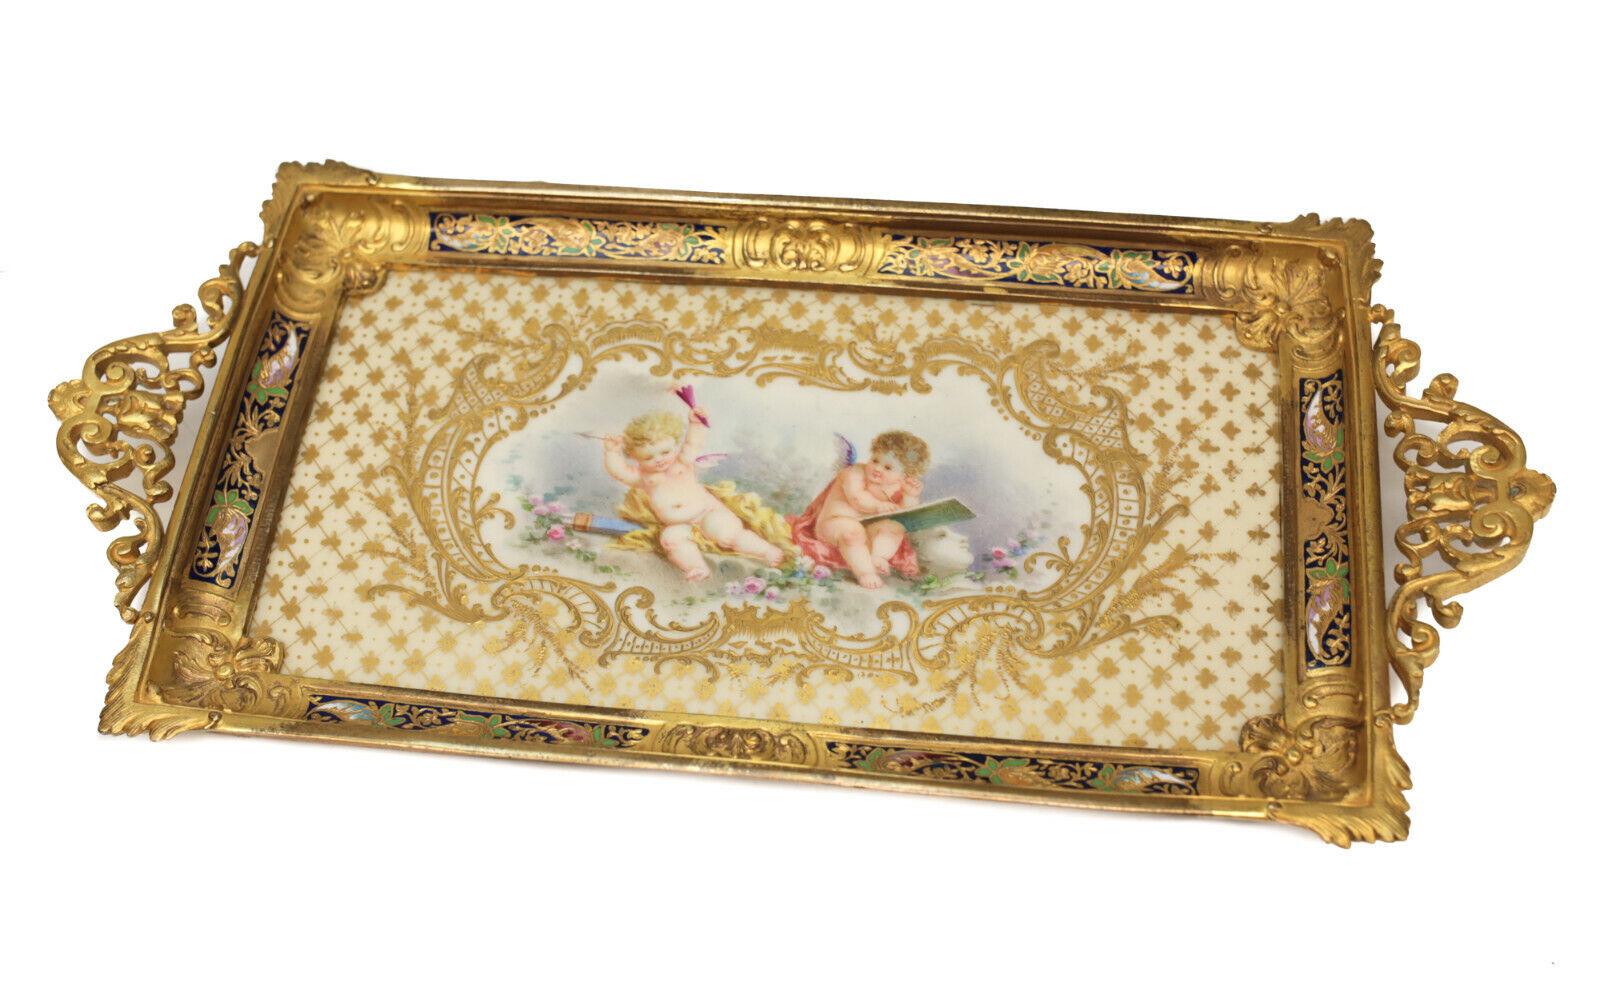 Gilt Sevres France Porcelain and Champleve Desk Tray, Cherubs, 19th Century